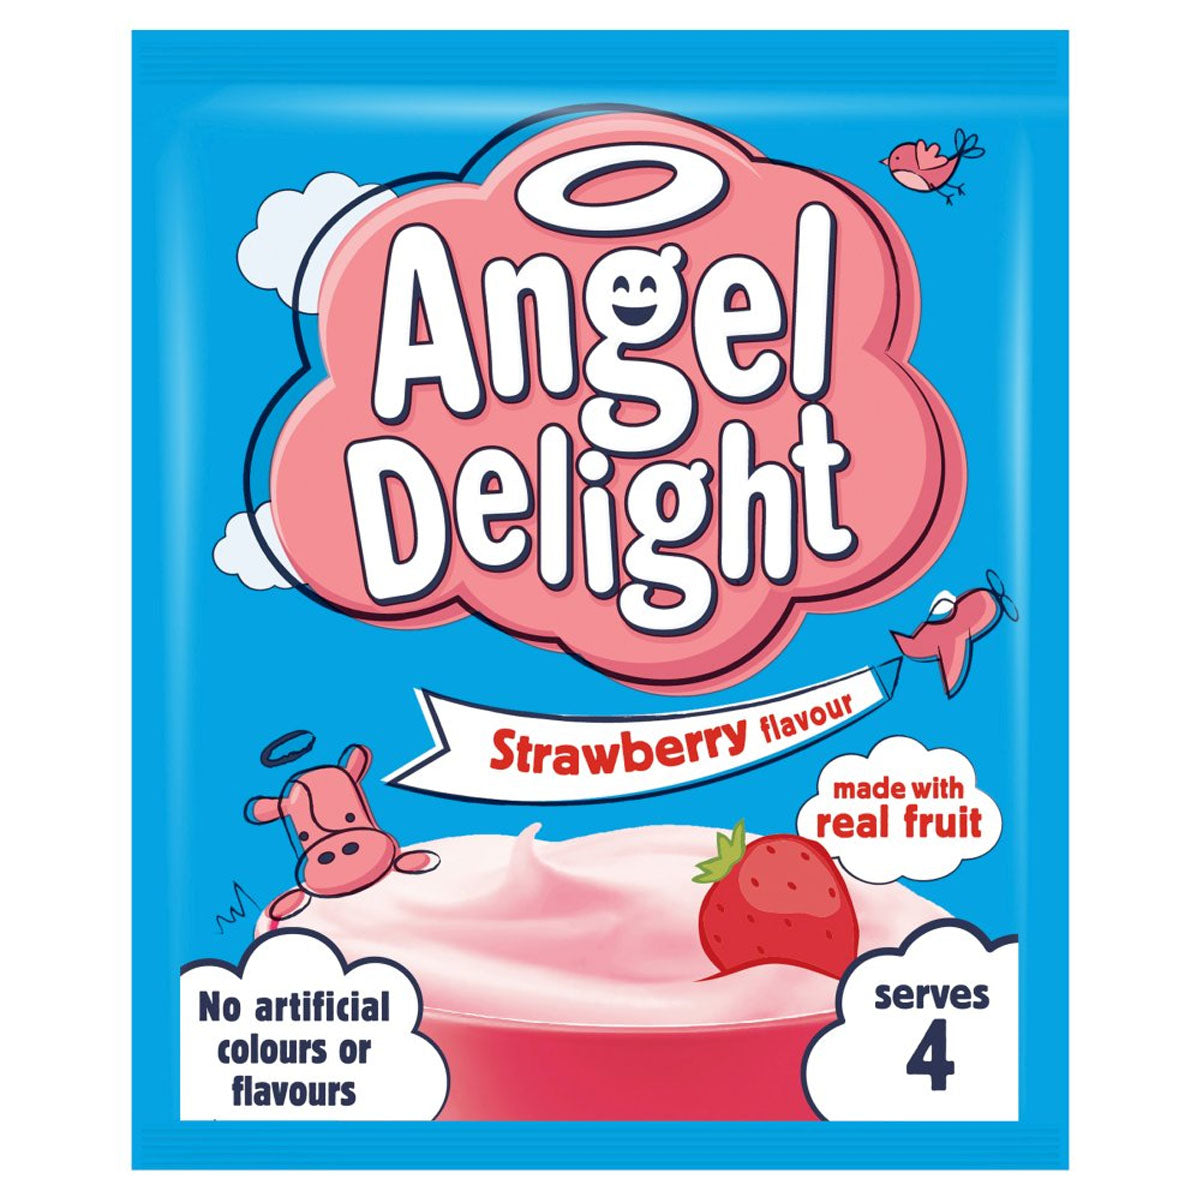 Angel Delight - Strawberry Flavour Instant Dessert - 59g by Angel Delight.